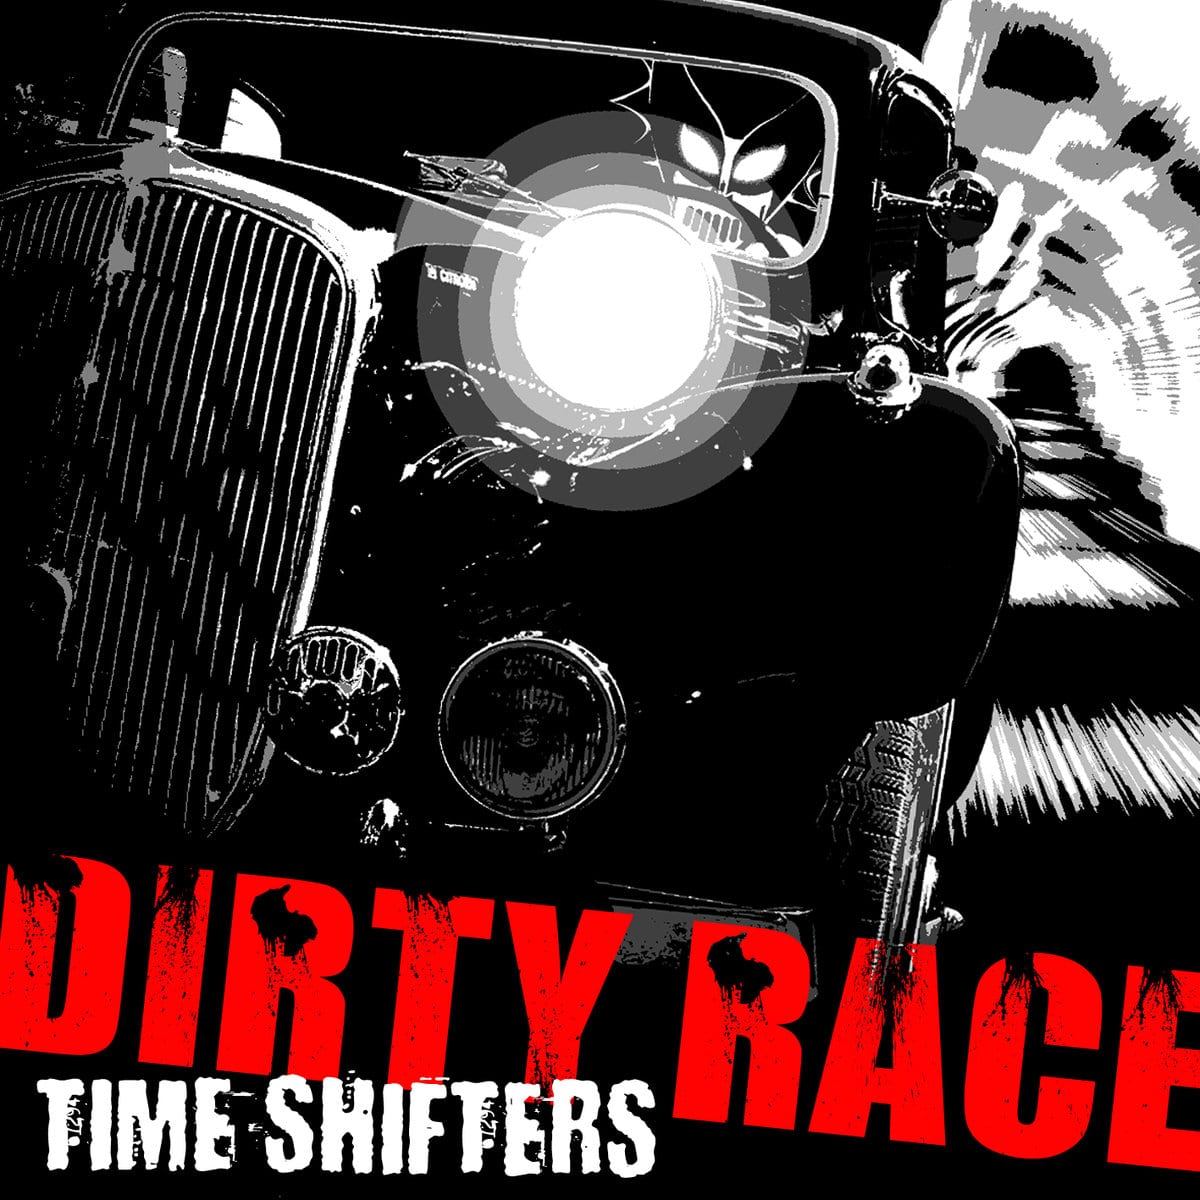 TIME SHIFTERS – Dirty Race